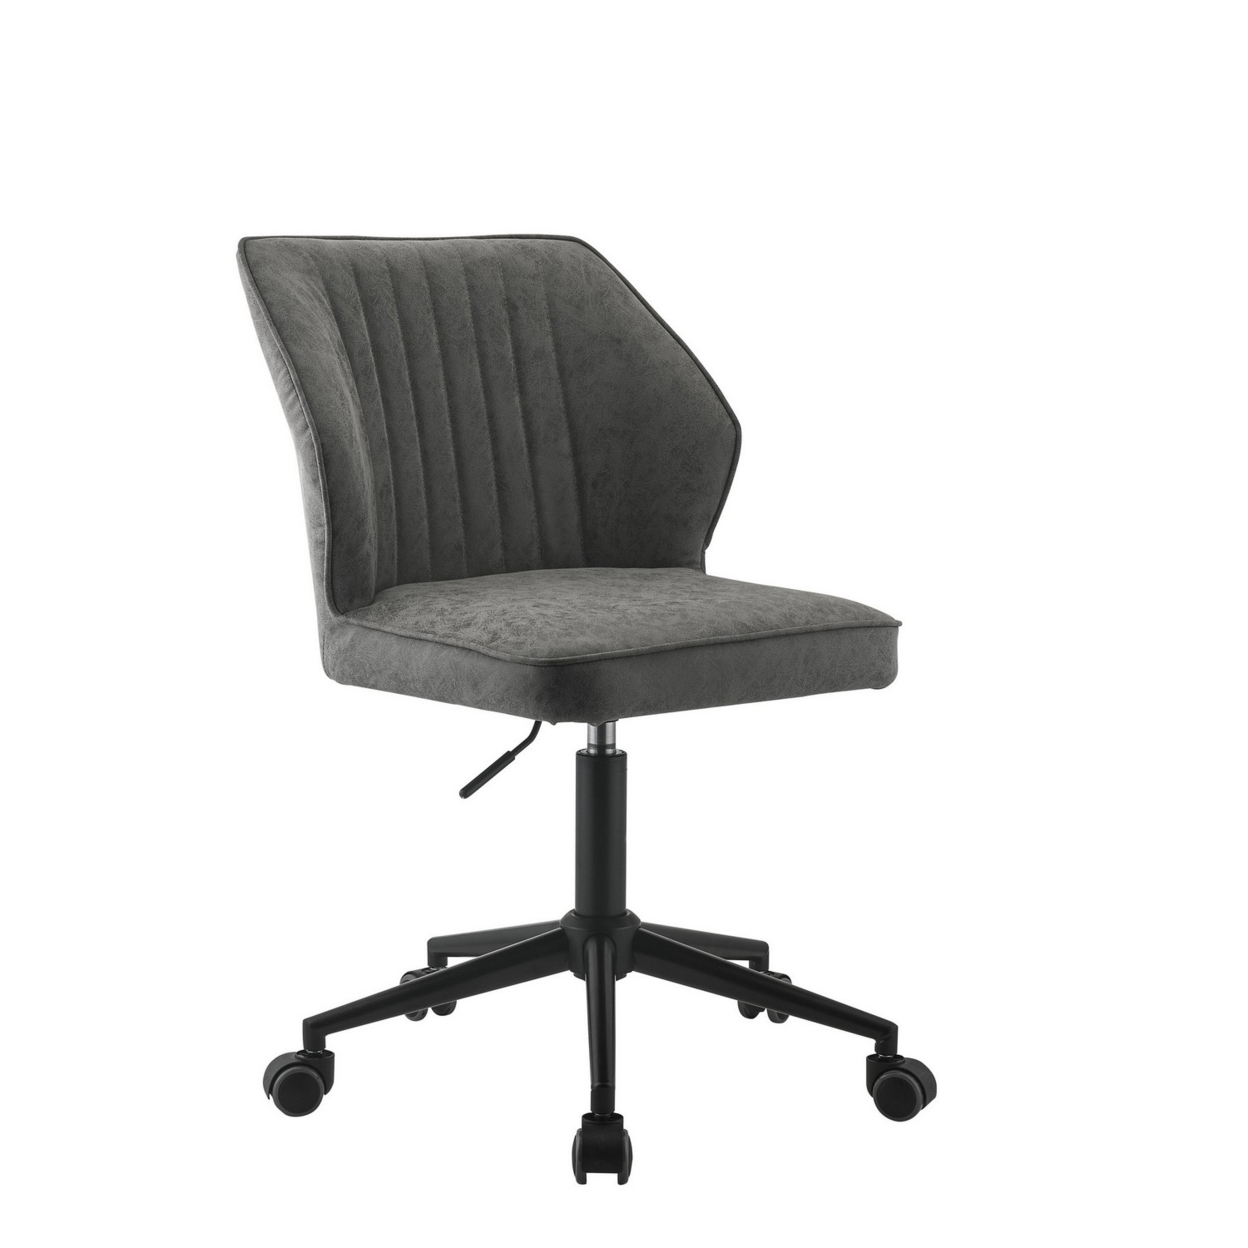 Swivel Office Chair With Stitching Details And Starbase, Gray- Saltoro Sherpi